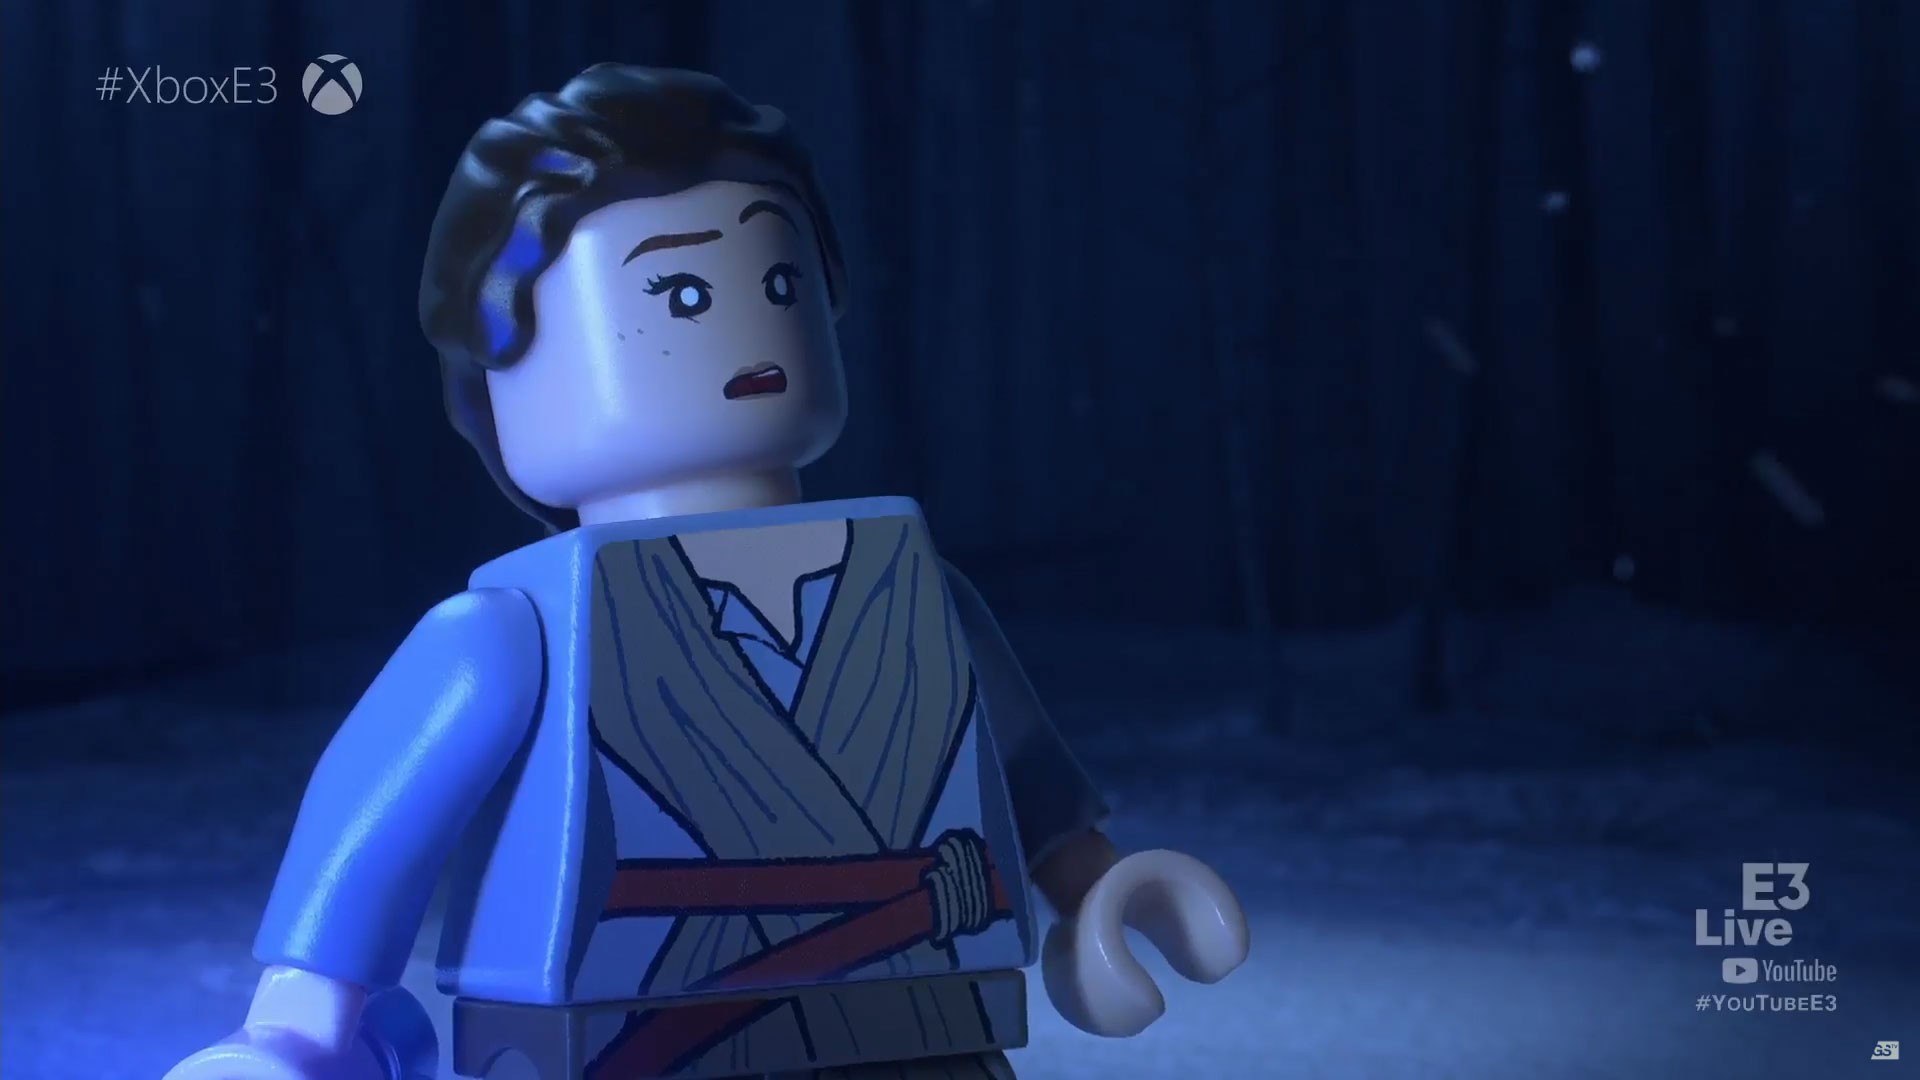 lego star wars game, lego star wars: the skywalker saga, xone, xbox one,switch, nintendo switch, ps4, playstation 4,us, north america, europe, release date, gameplay, features, price, pre-order now, traveller's tales, warner bros interactive entertainmet